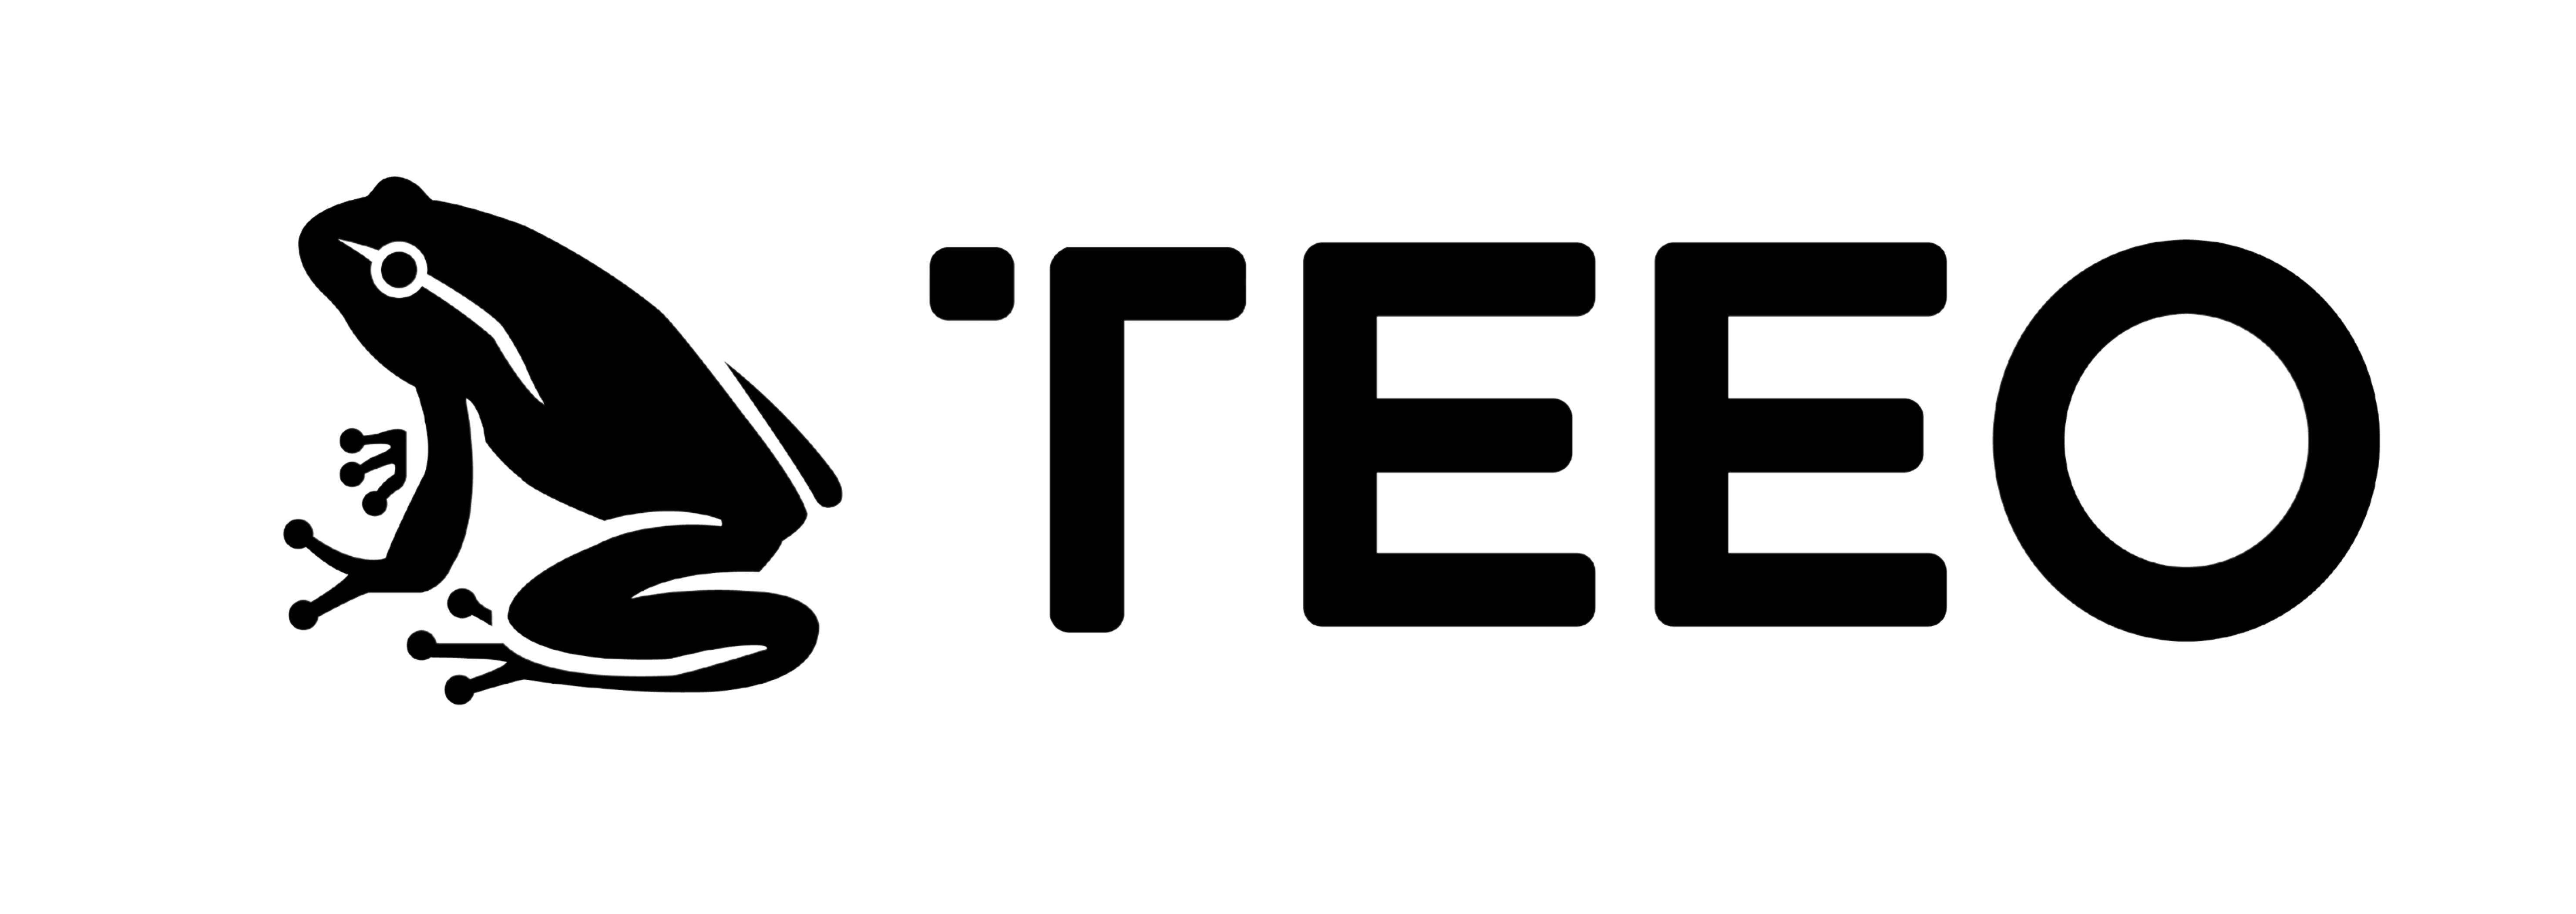 https://www.teeocreations.com/wp-content/uploads/2021/10/cropped-TEEO-LOGO-PNG-1.png